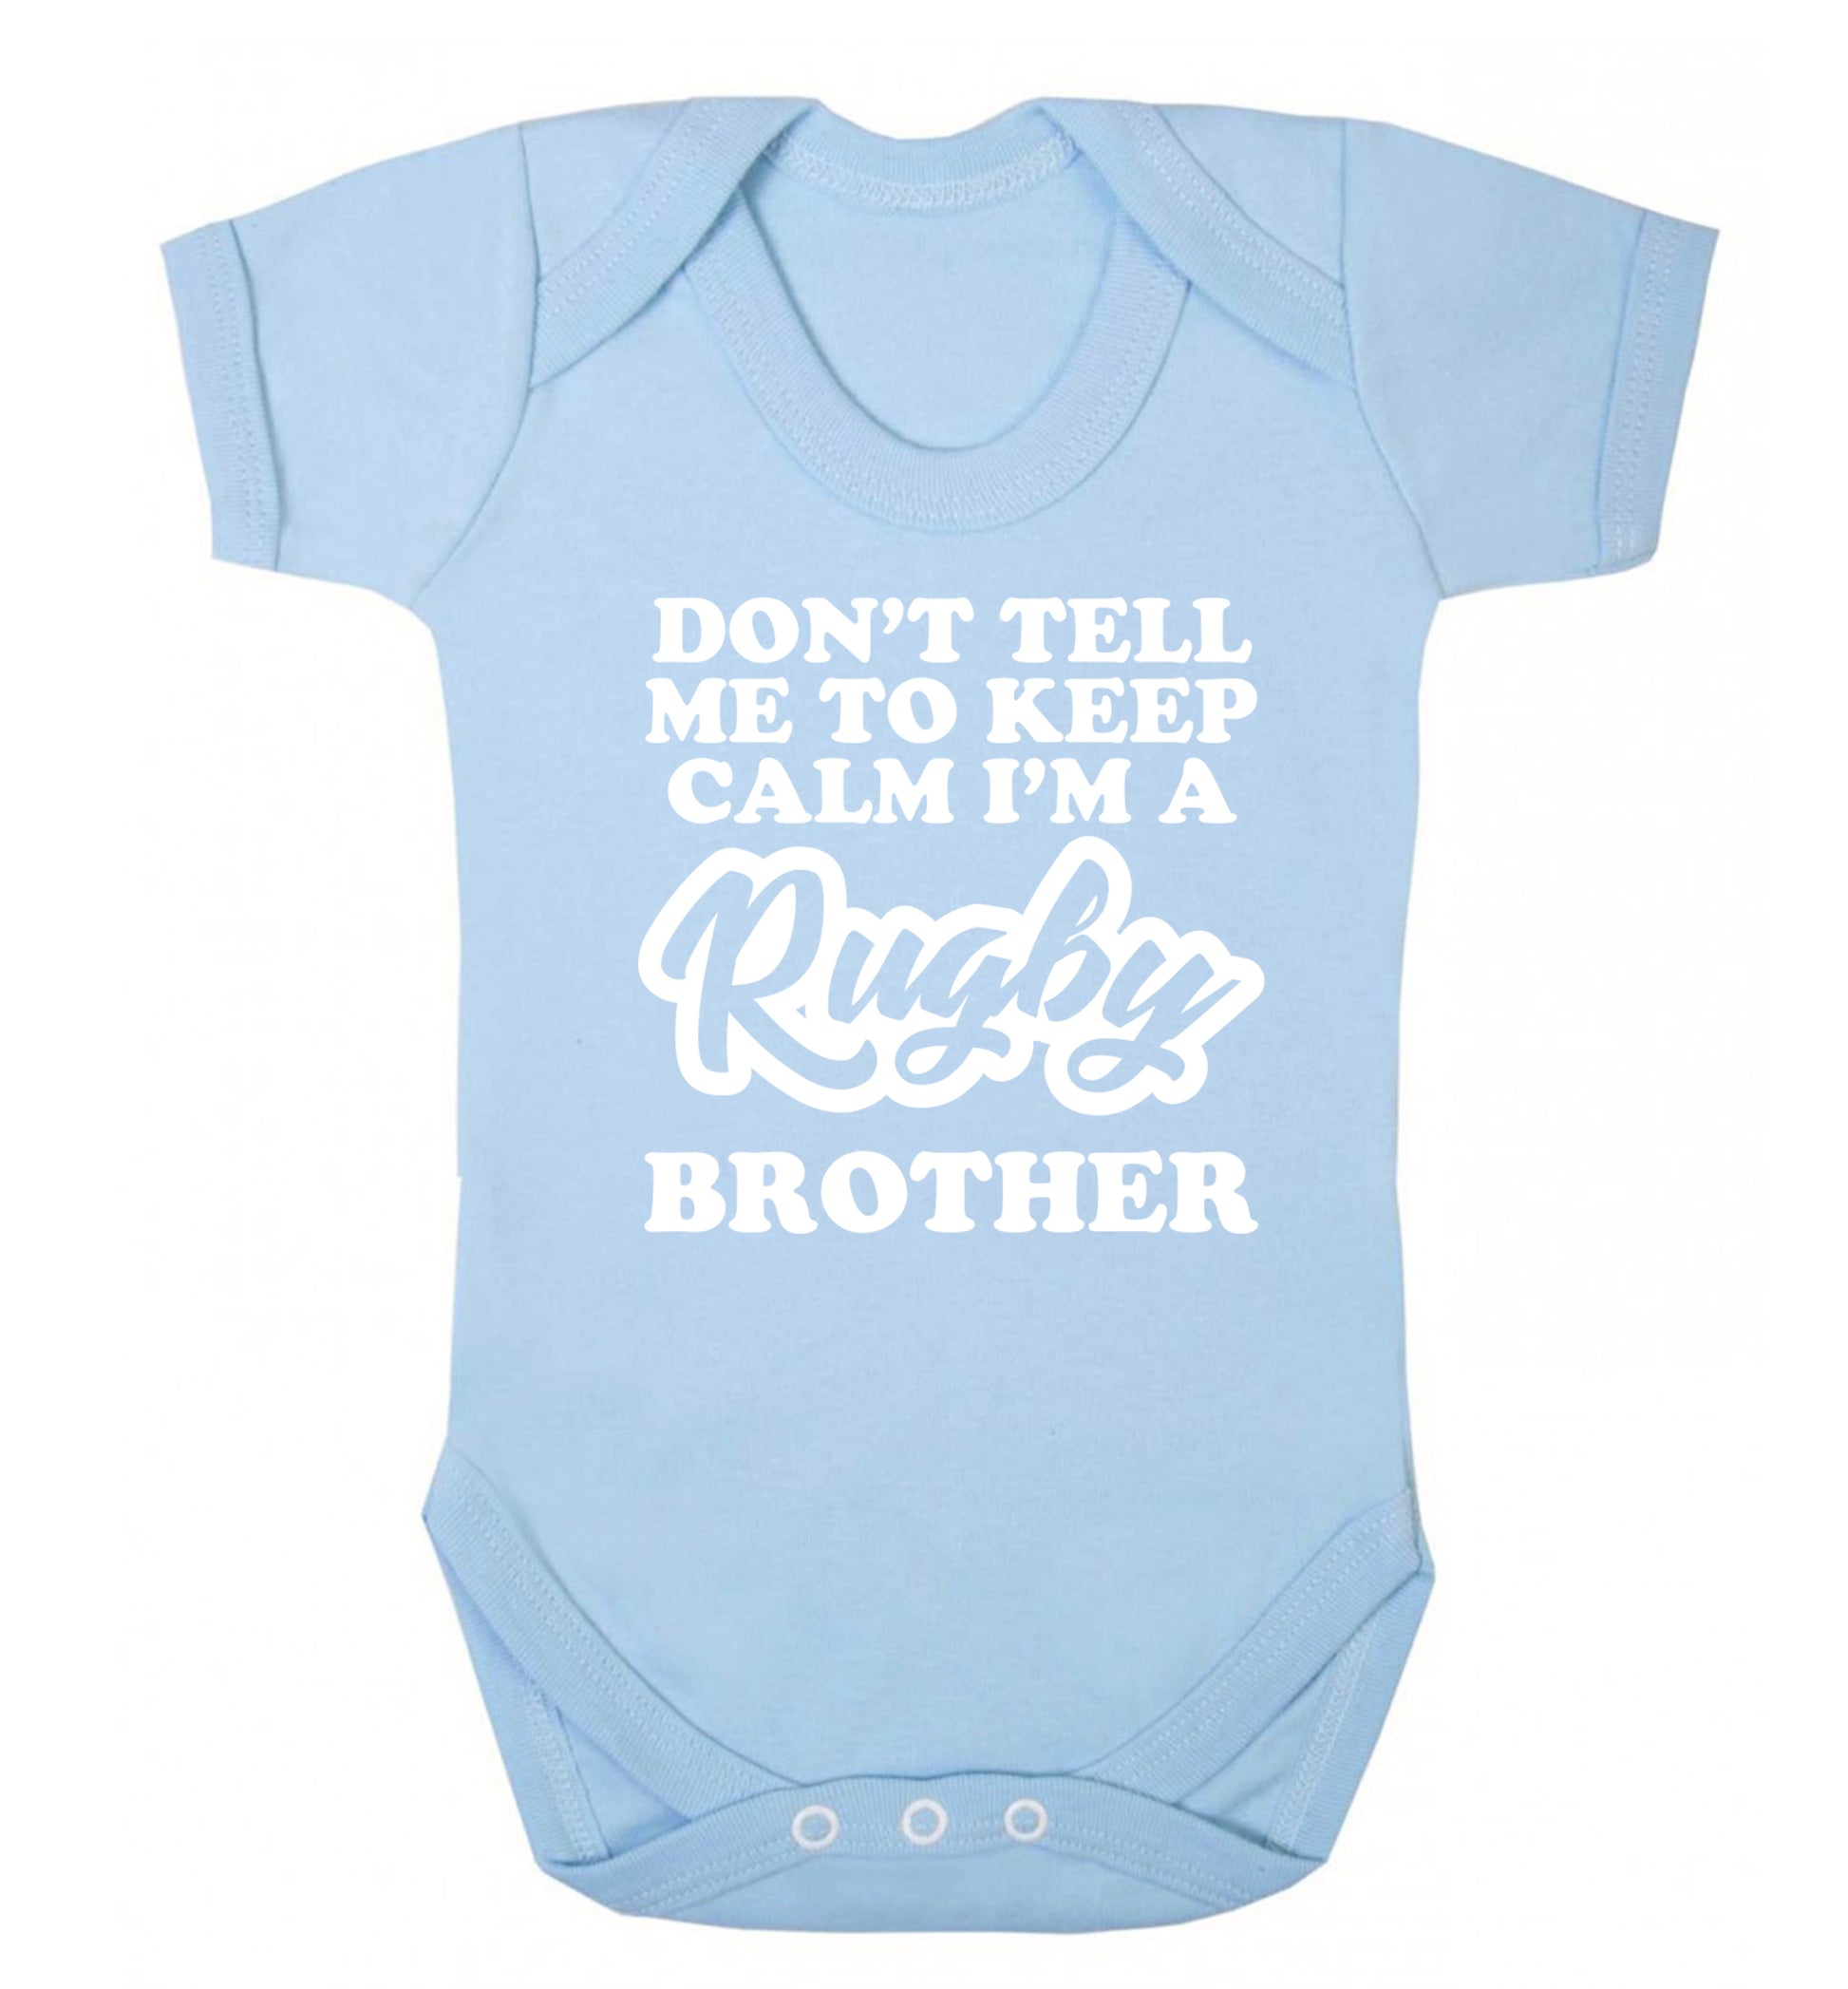 Don't tell me keep calm I'm a rugby brother Baby Vest pale blue 18-24 months